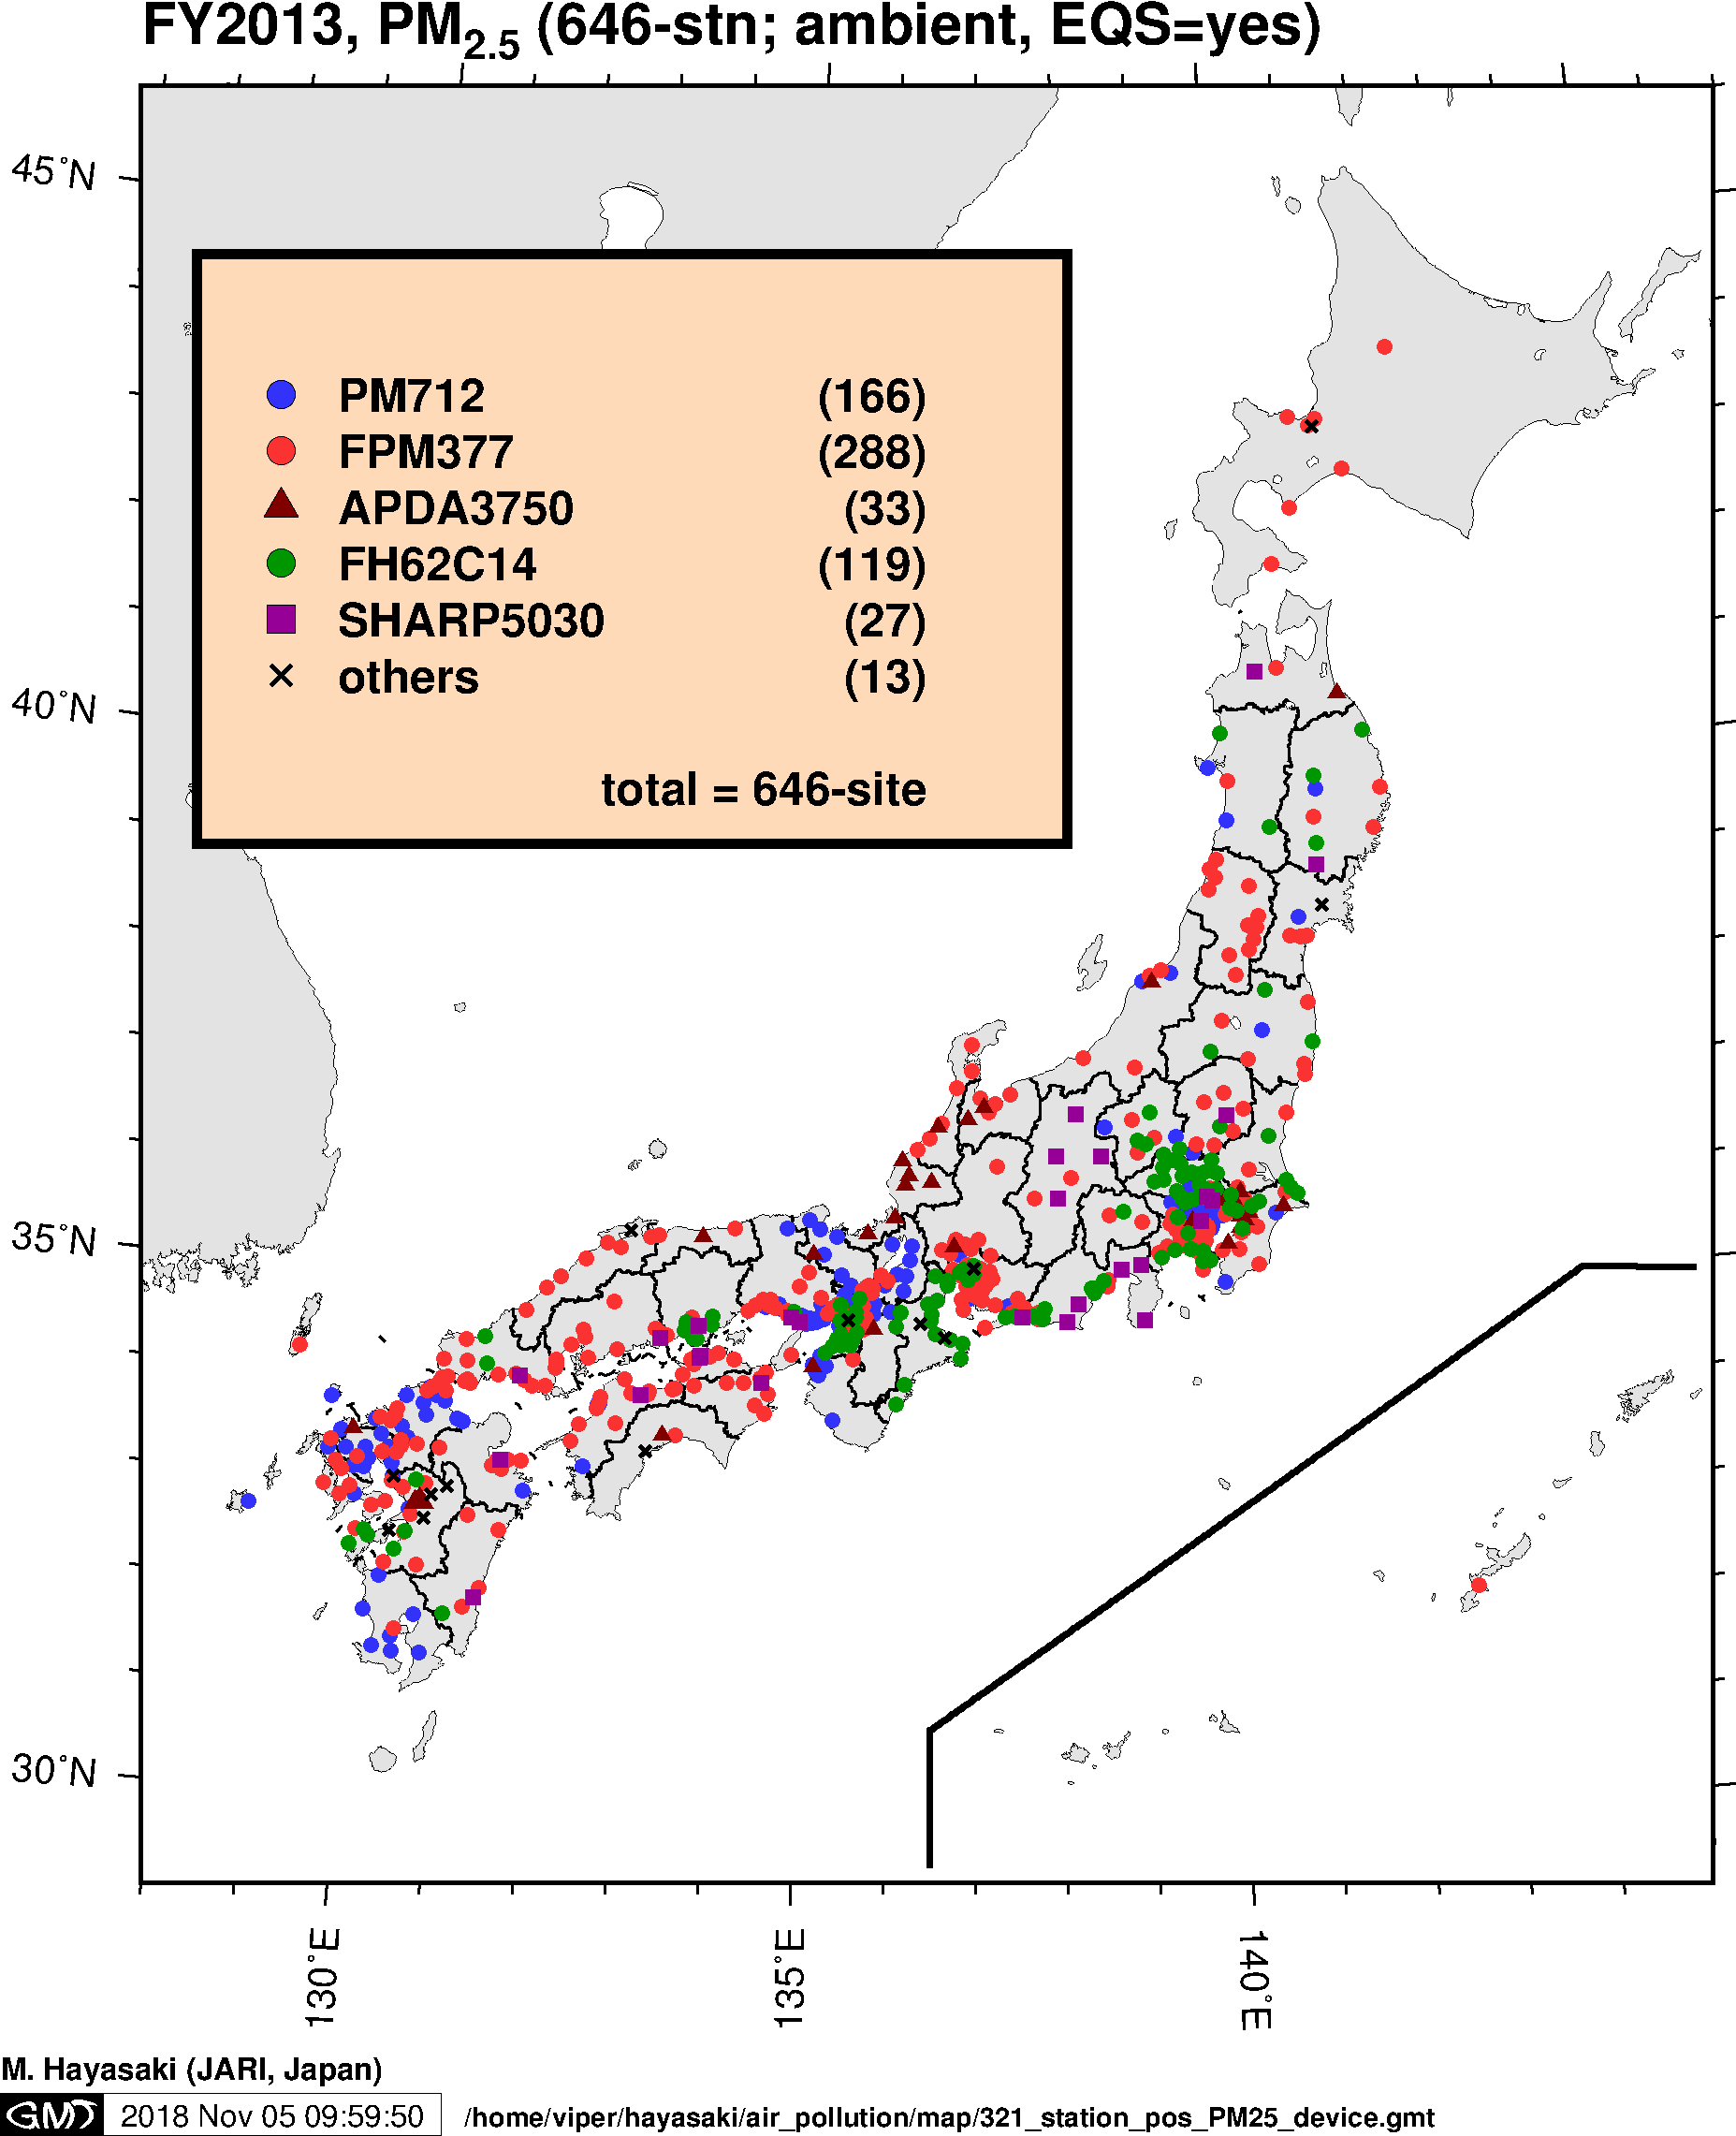 PM2.5 Monitoring devices in Japan (FY2013)